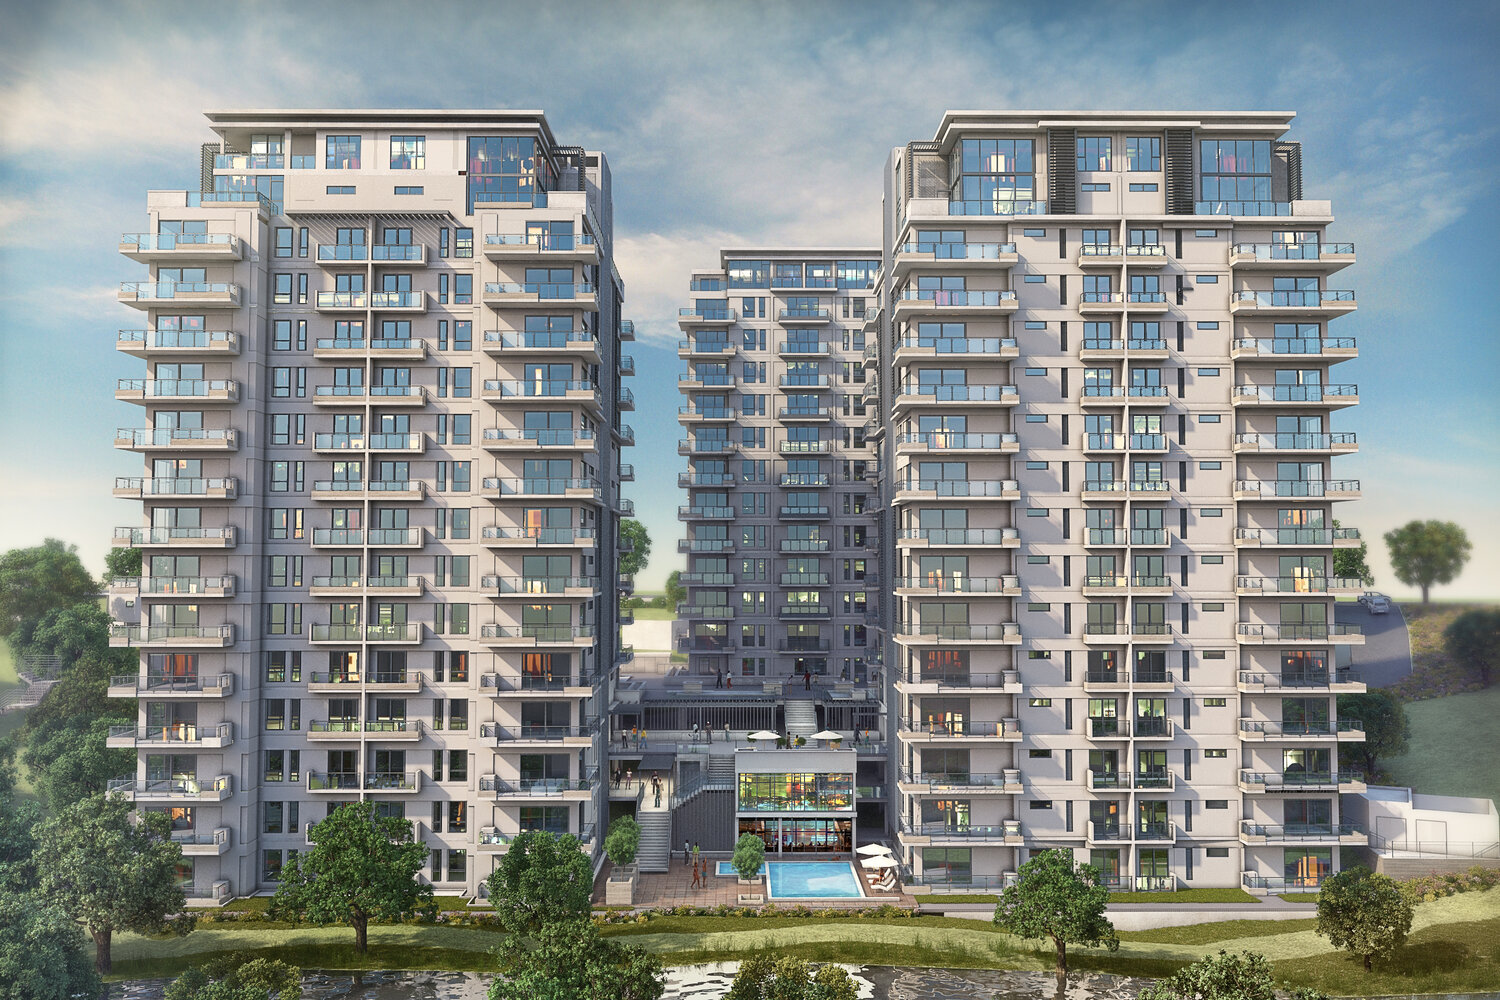 Grand View Addis – The latest offering of stylish living in Addis Ababa.